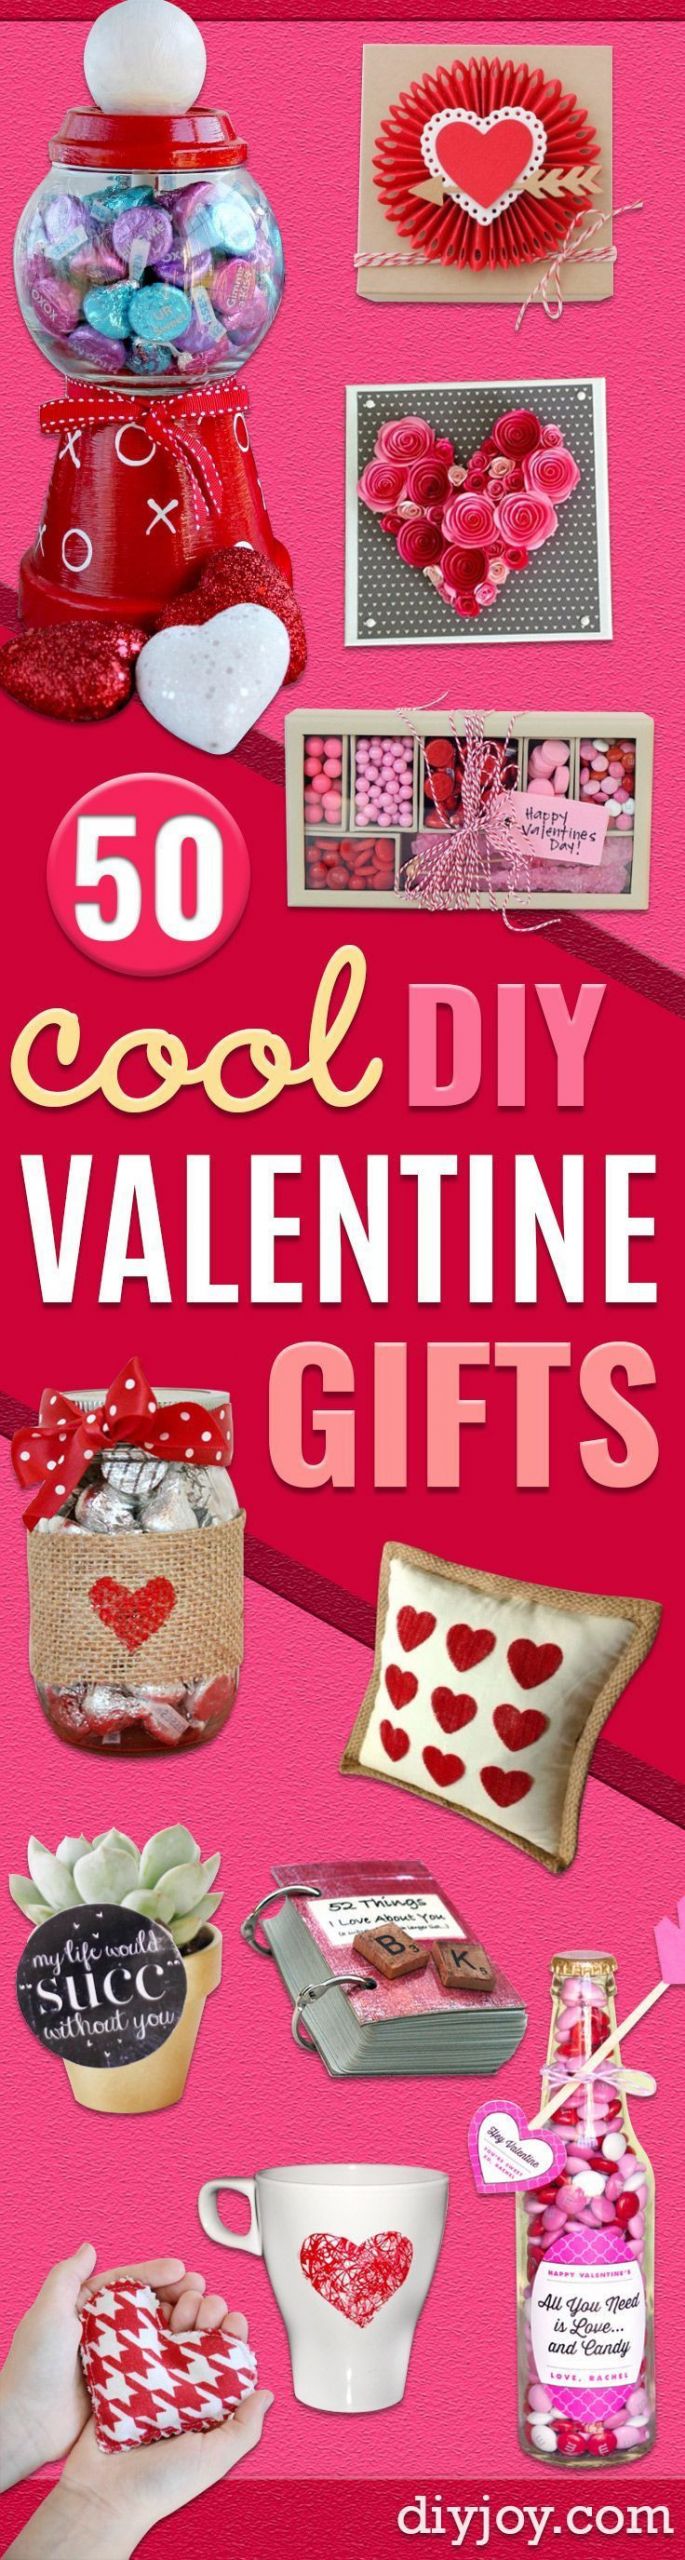 Valentine Day Gift Ideas For Mom
 271 best images about DIY Gifts and Gift Basket Ideas on